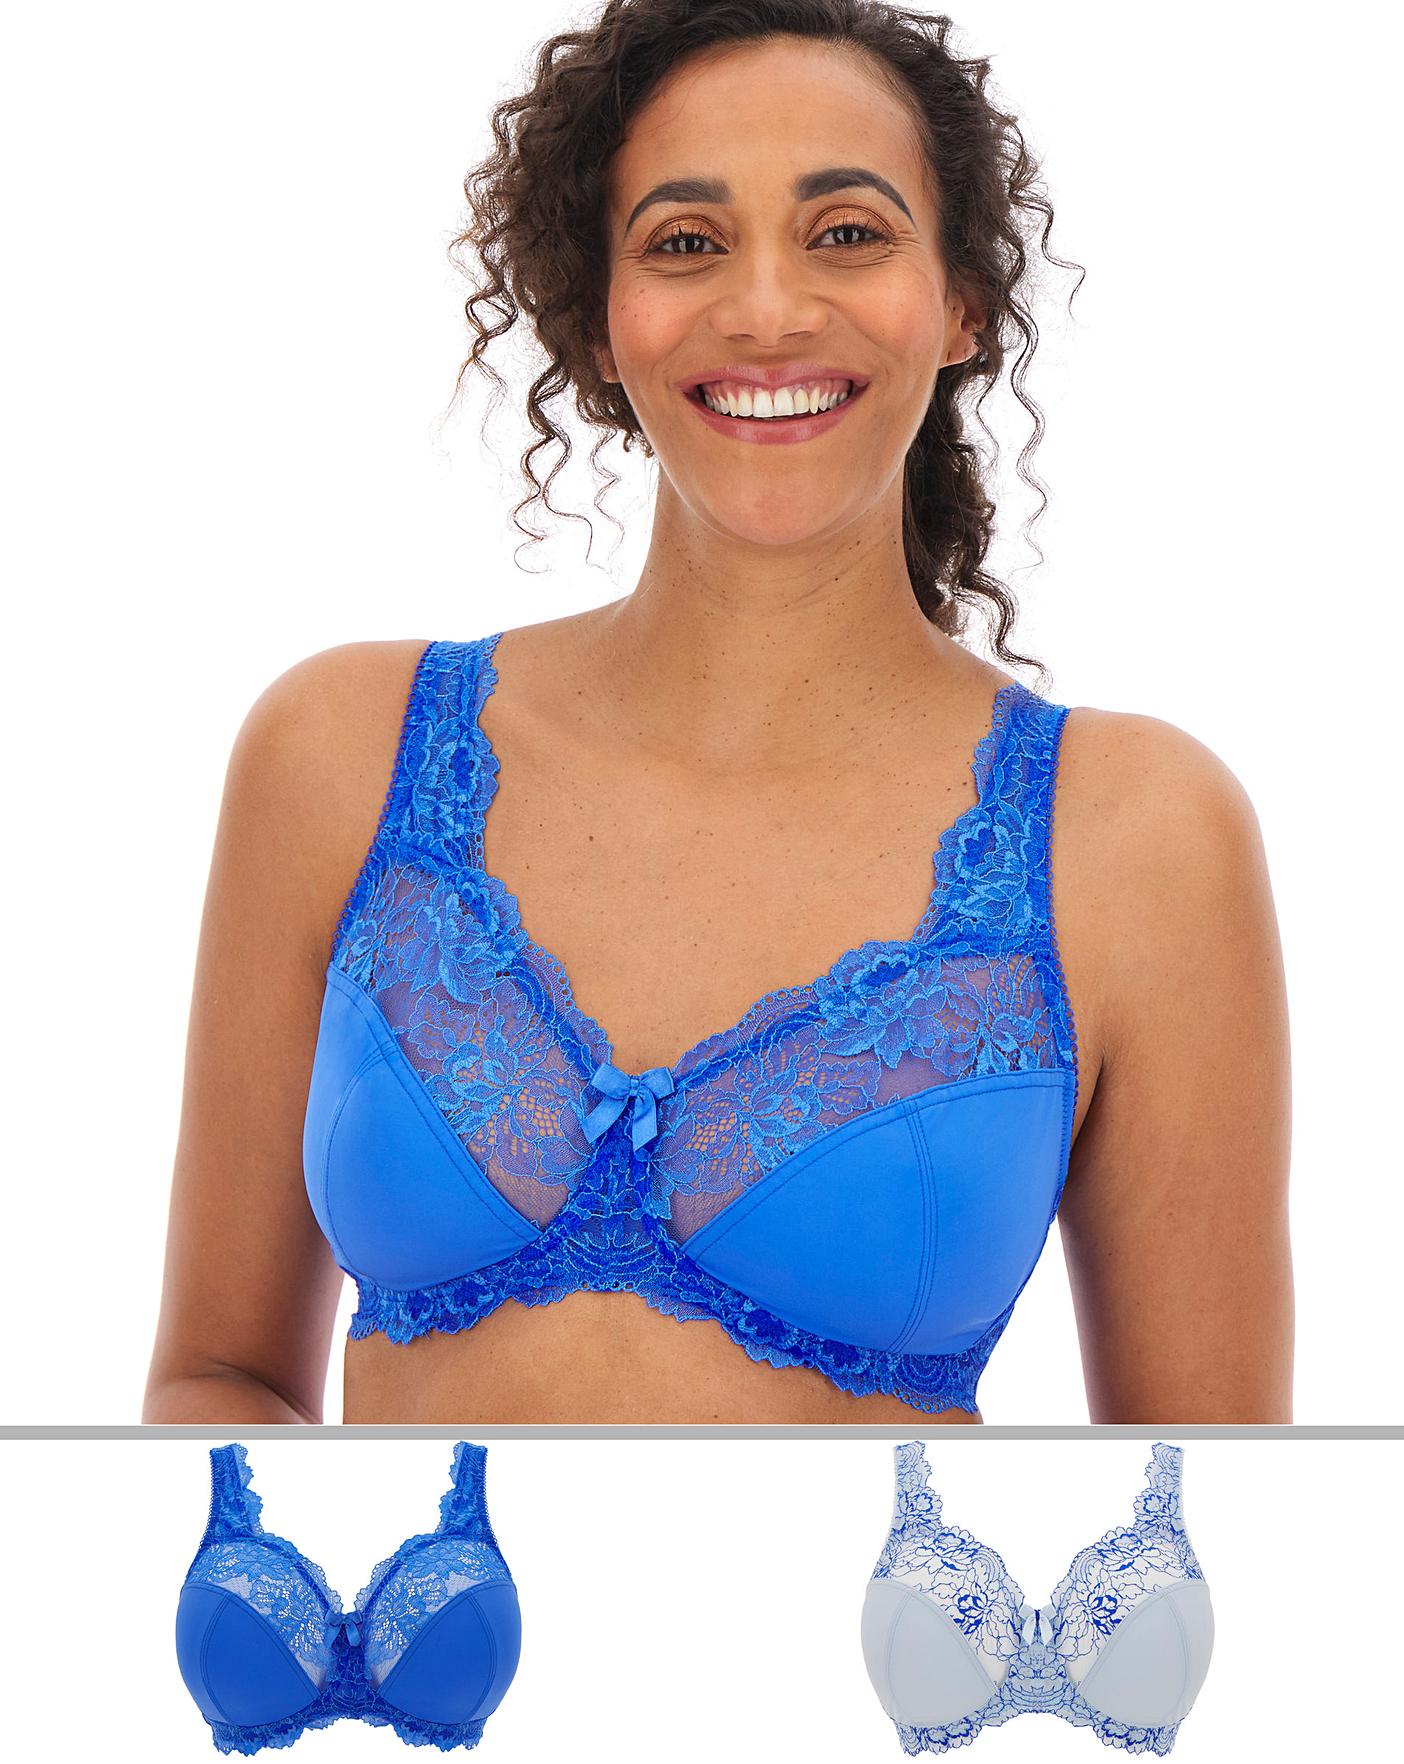 2 Pack Ella Lace Full Cup Non-Wired Bras